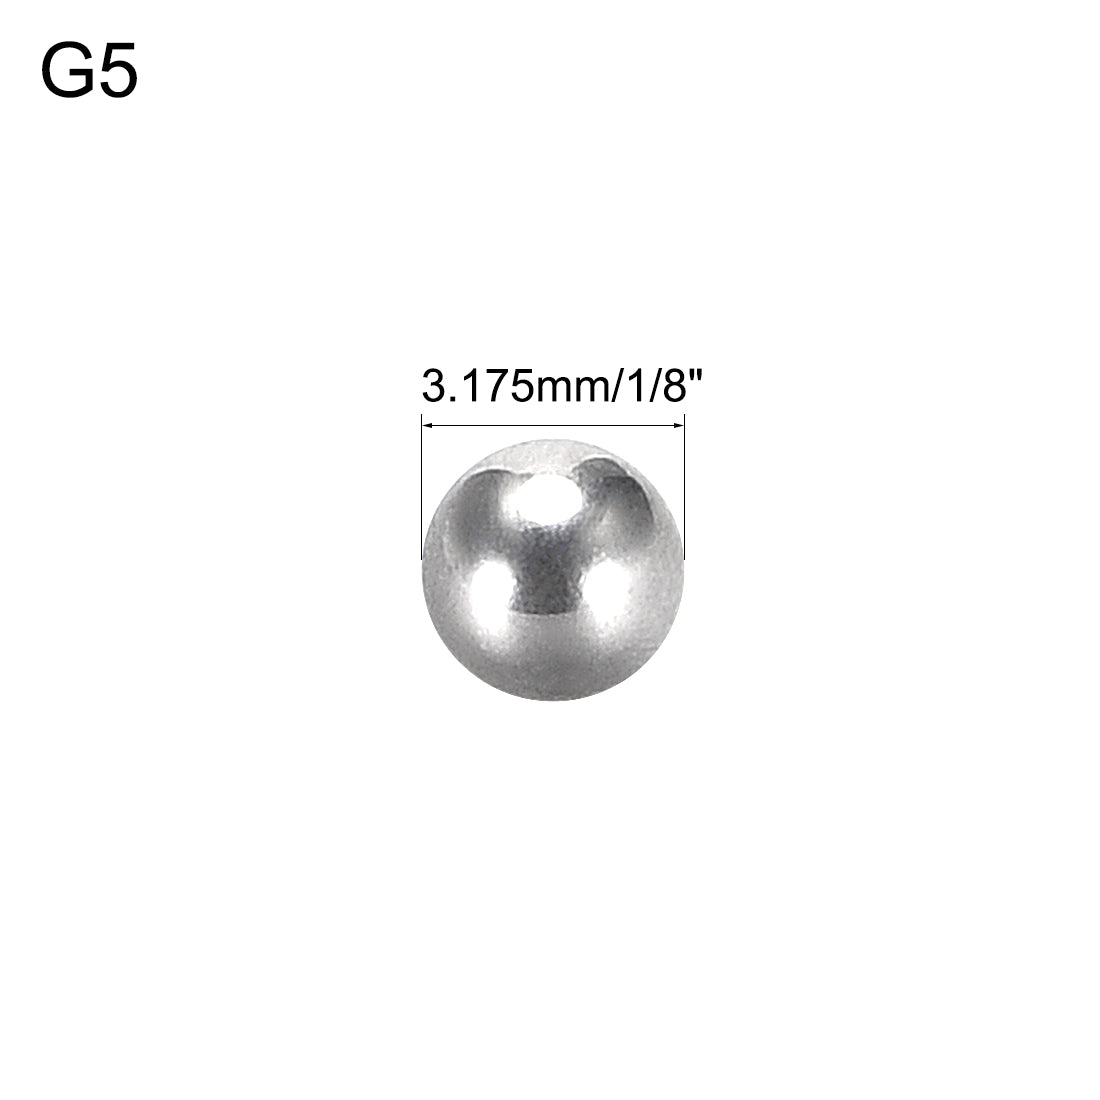 Uxcell Uxcell Precision 304 Stainless Steel Bearing Balls 9/64 Inch G5 10pcs